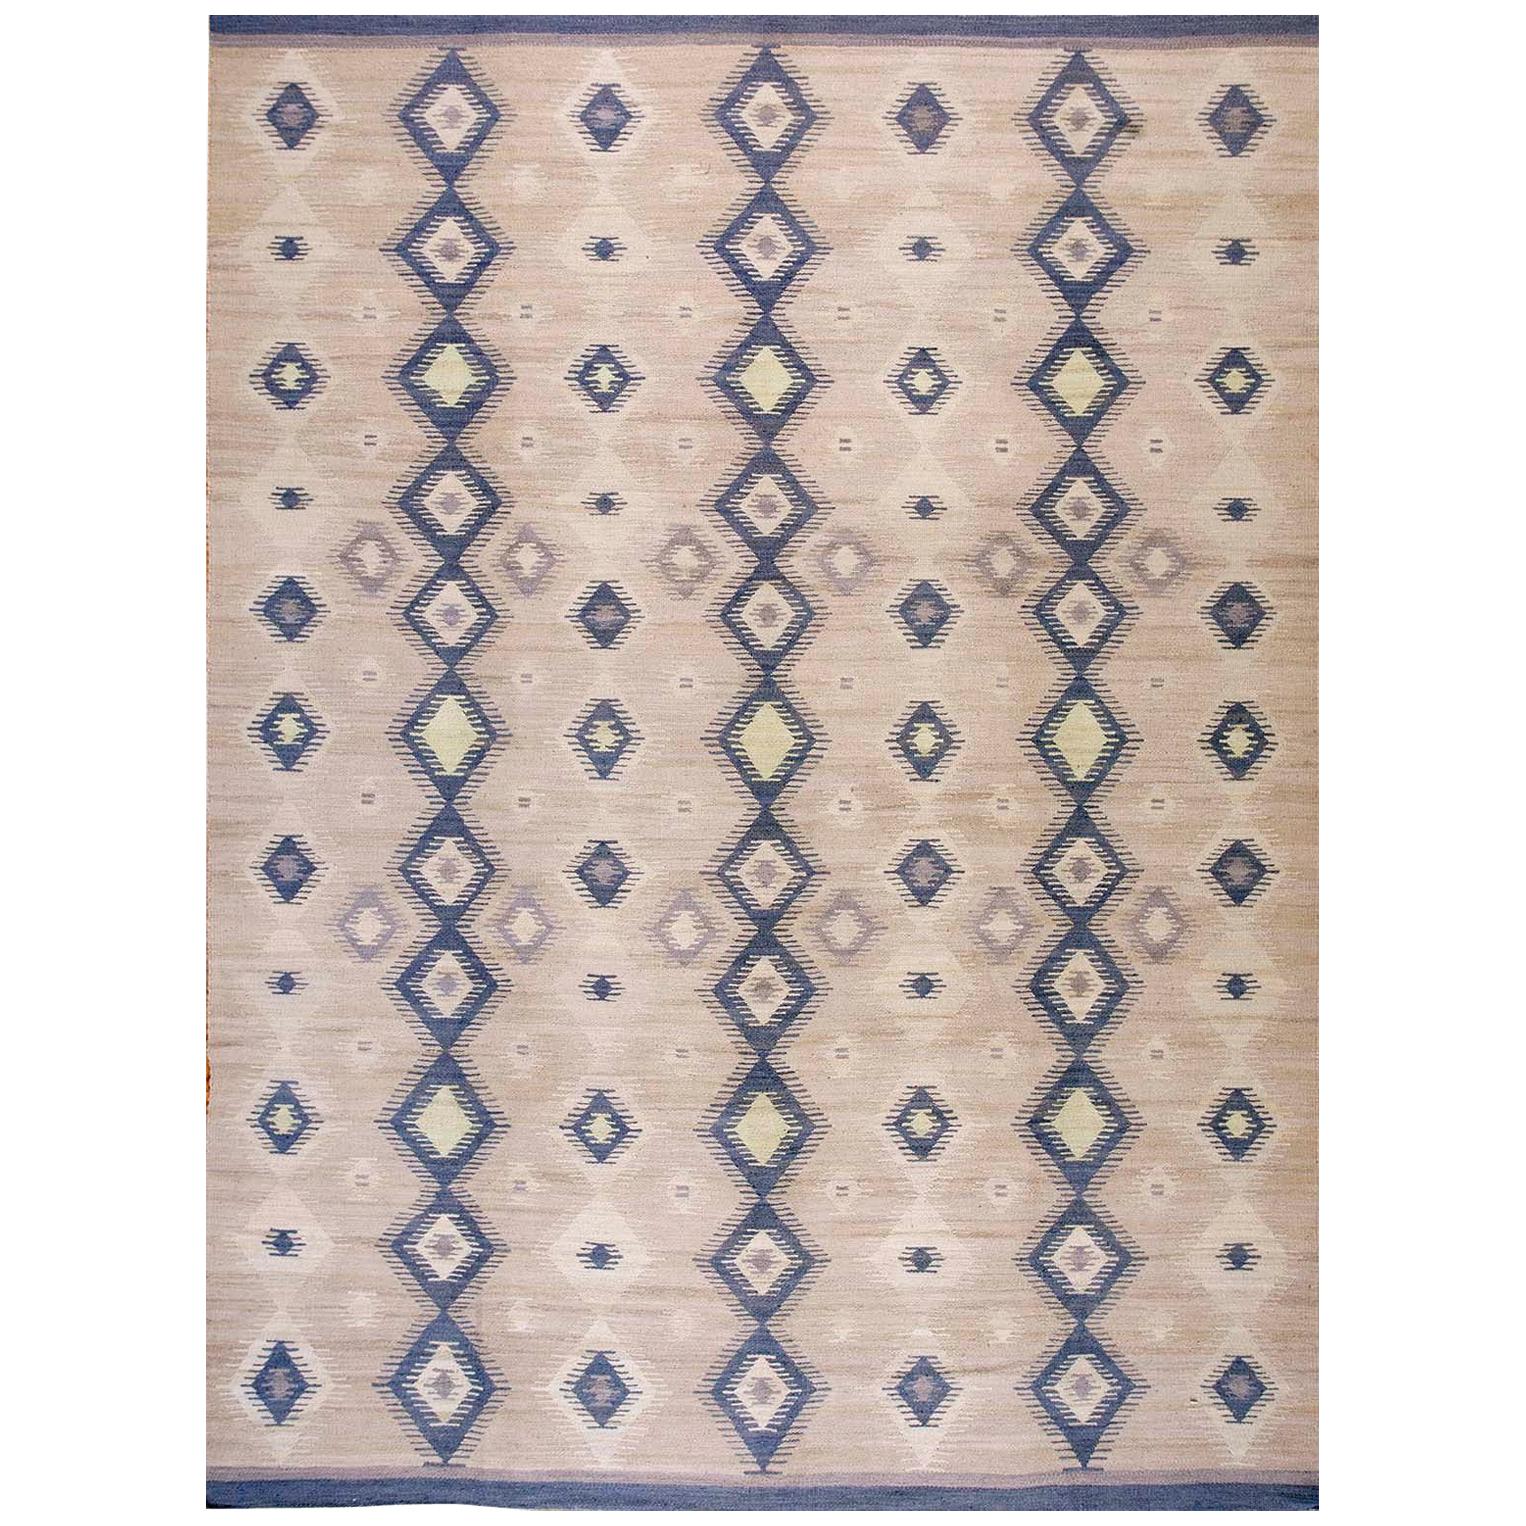 Contemporary Handwoven Navajo Style Flat Weave Carpet (9' x 12' - 275 x 365 cm) For Sale